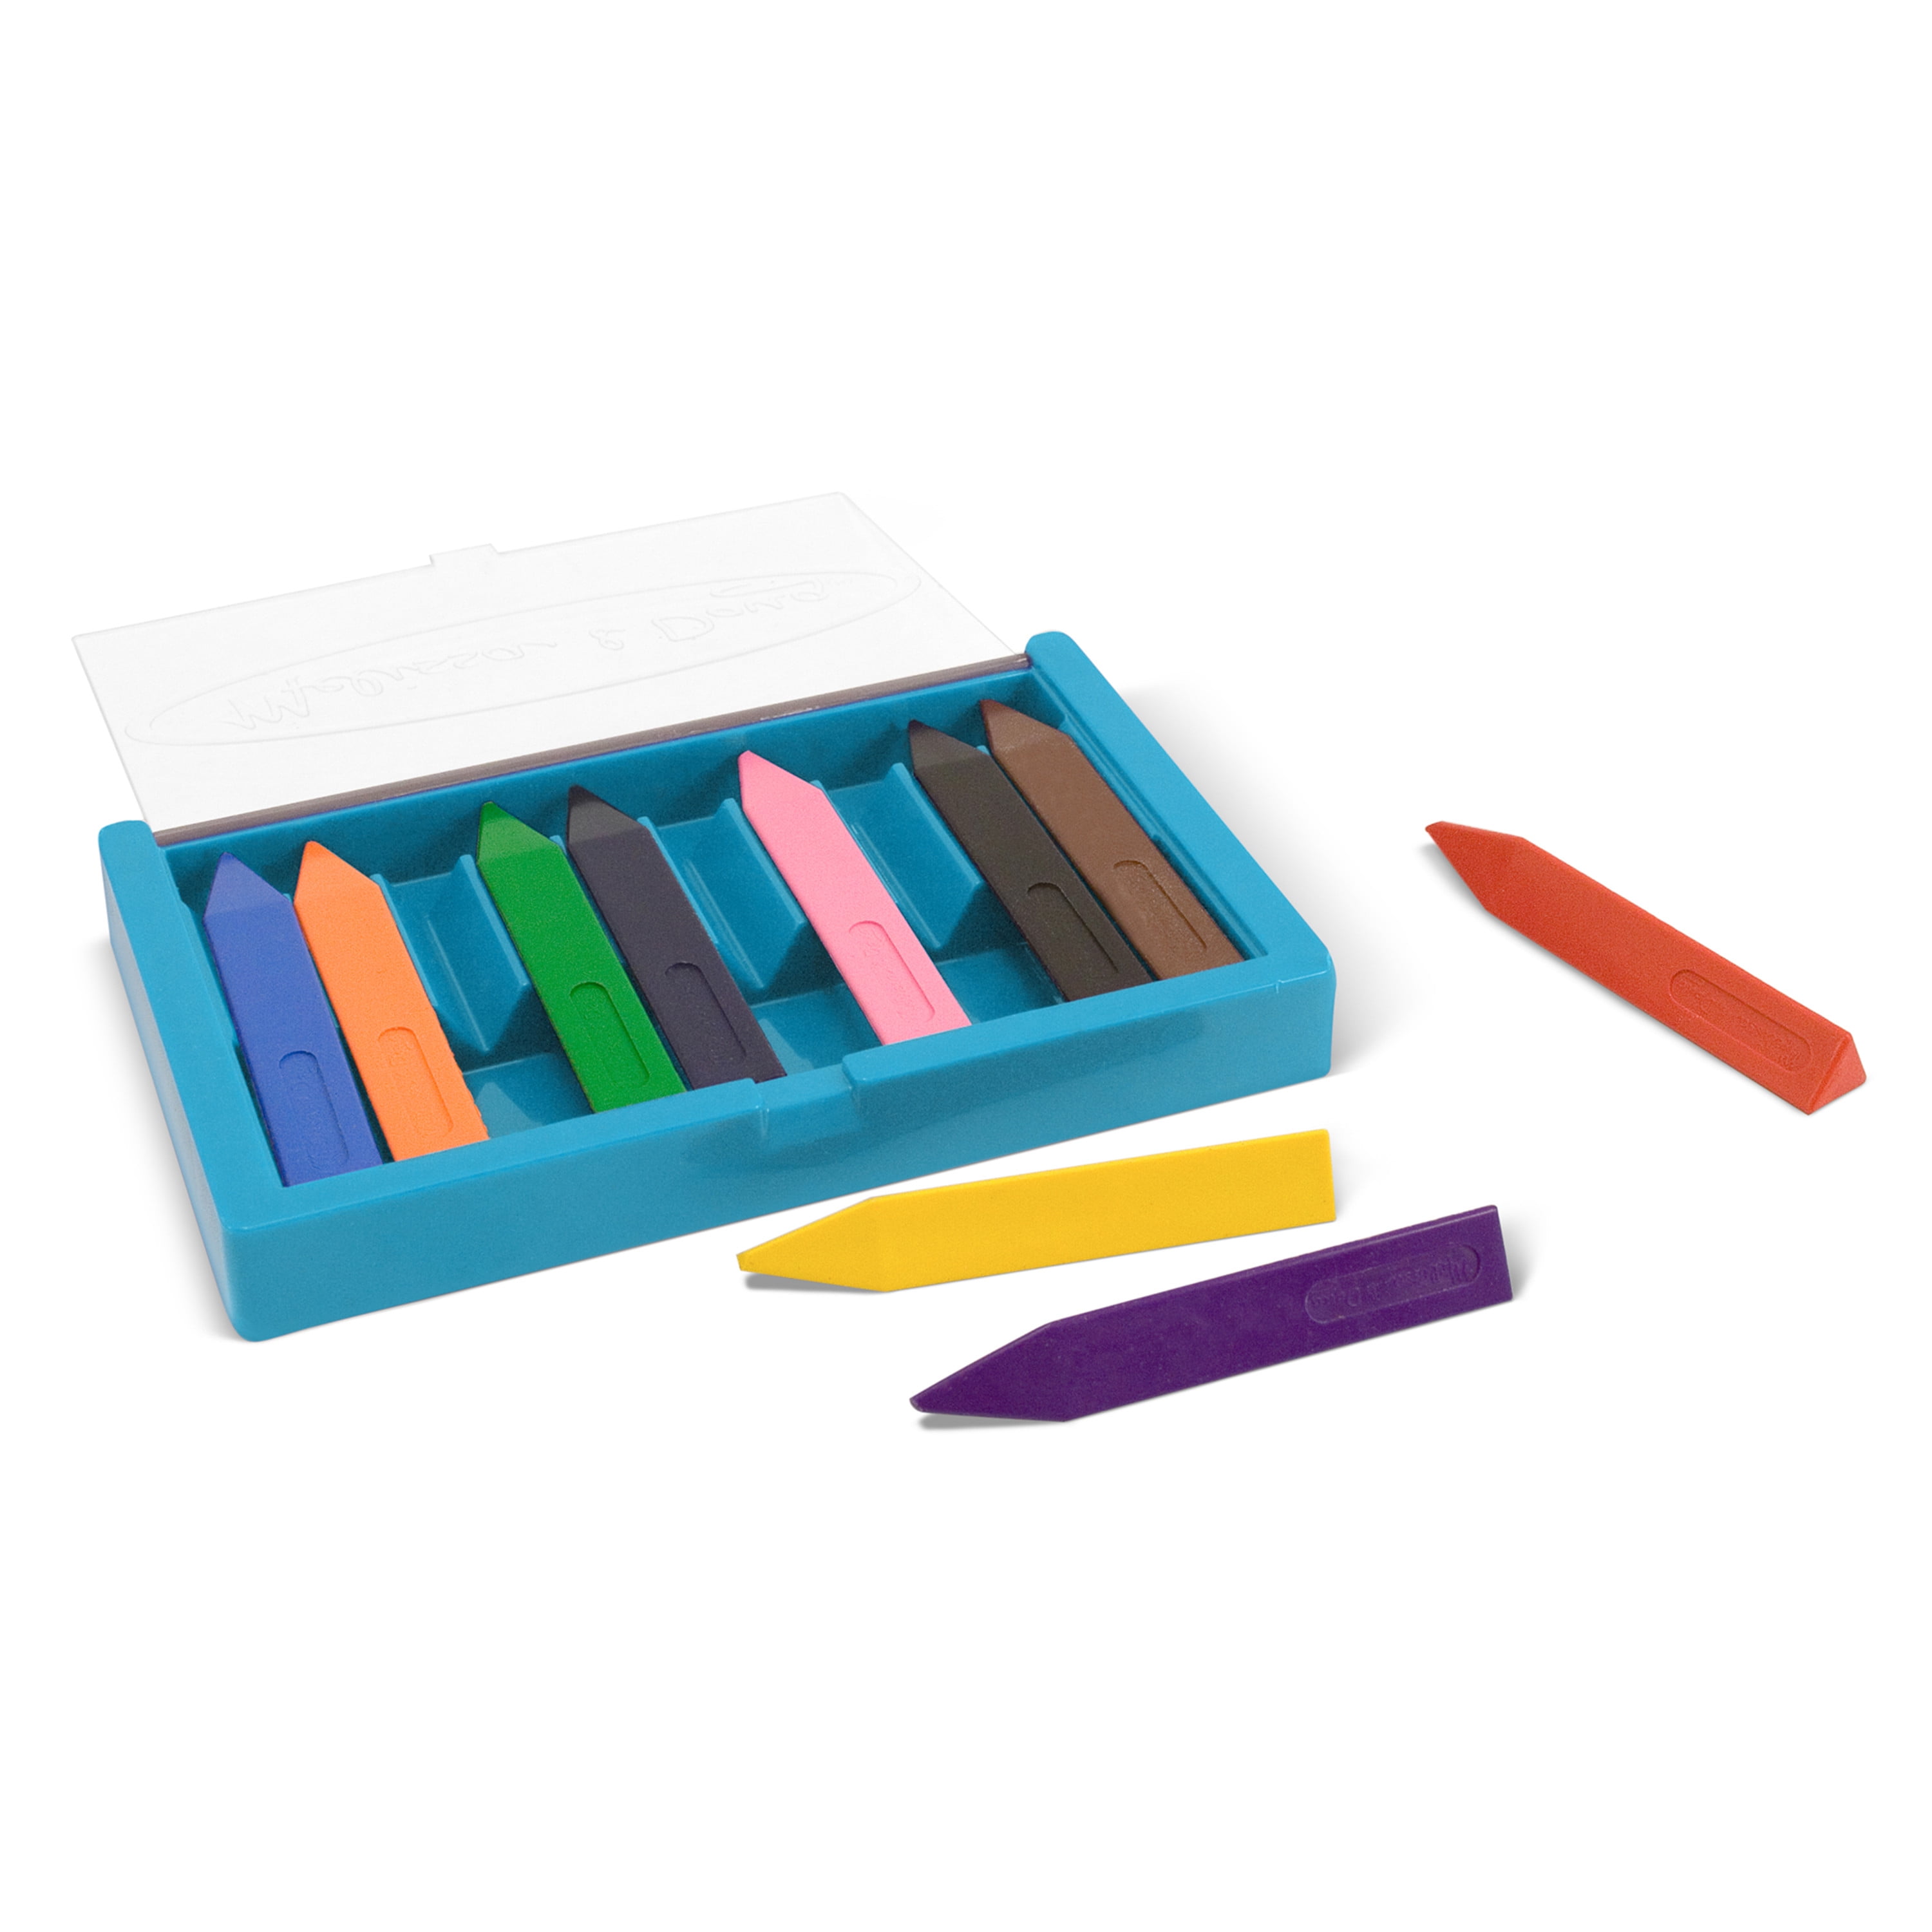 Nature Play 2342119 Jumbo Triangular Crayons, Assorted Color - Case of 96 -  12 Count, 1 - Kroger